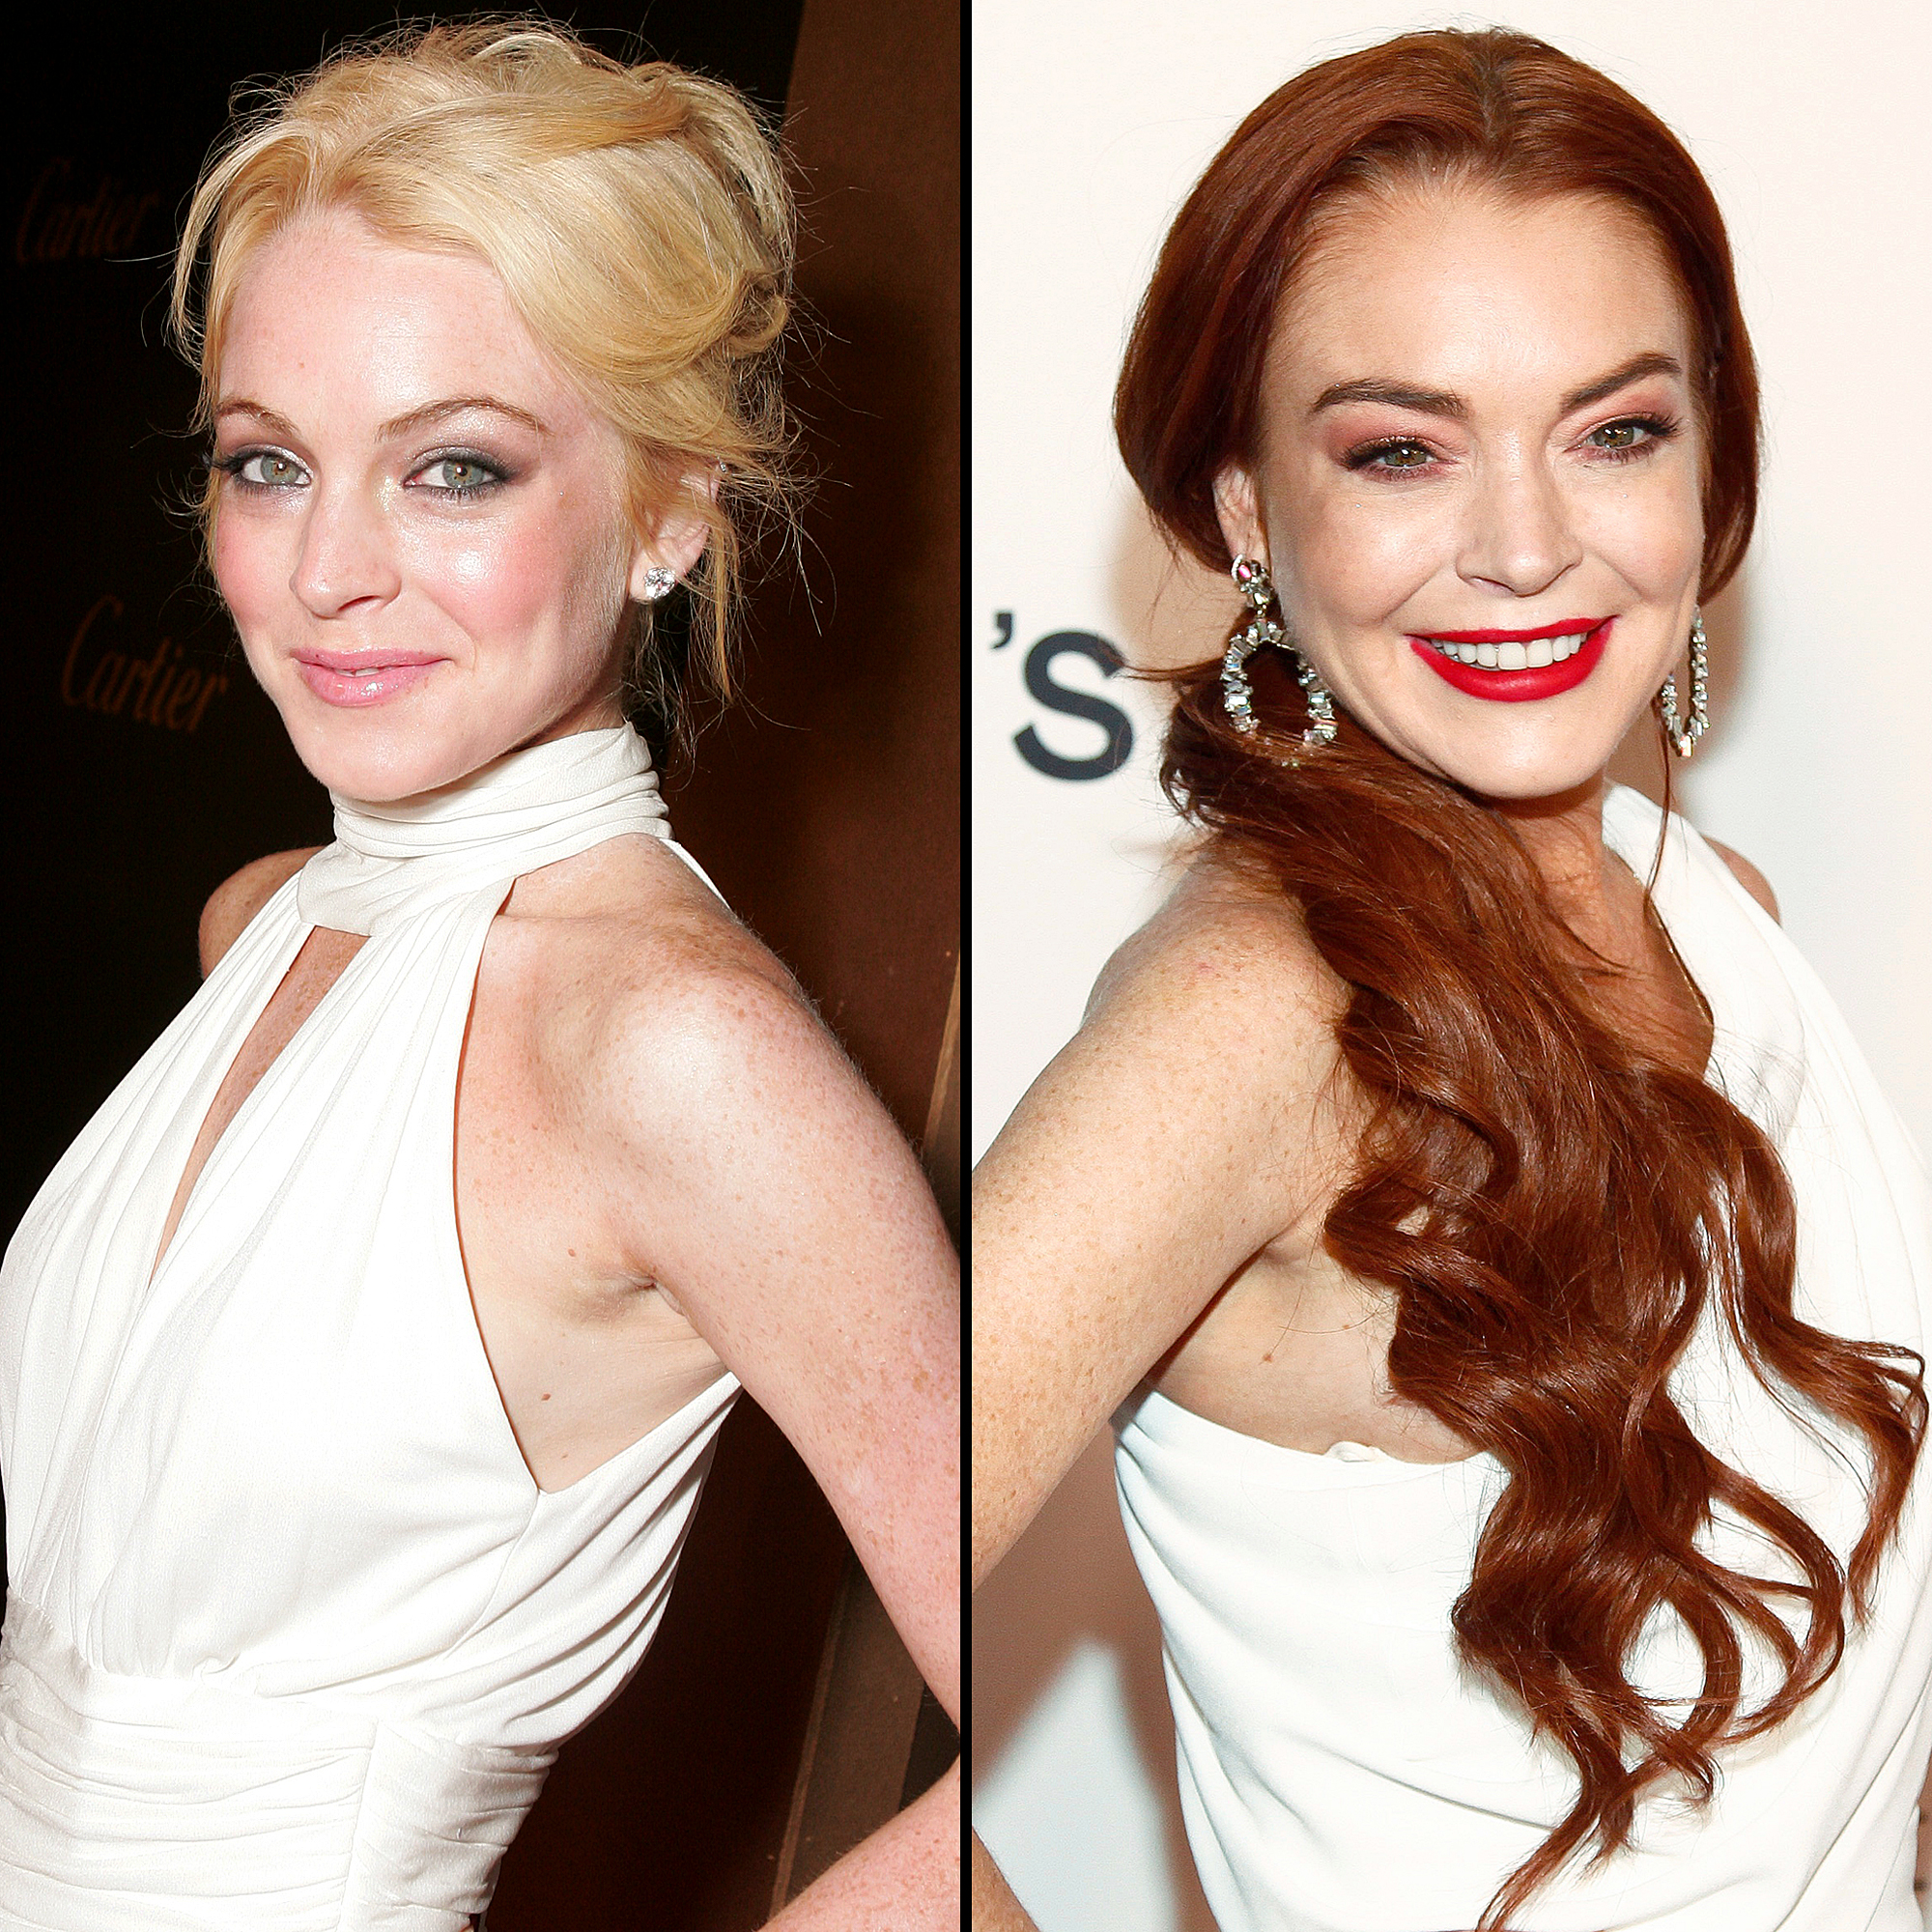 Just My Luck' Stars: Where Are They Now? Lindsay Lohan and More